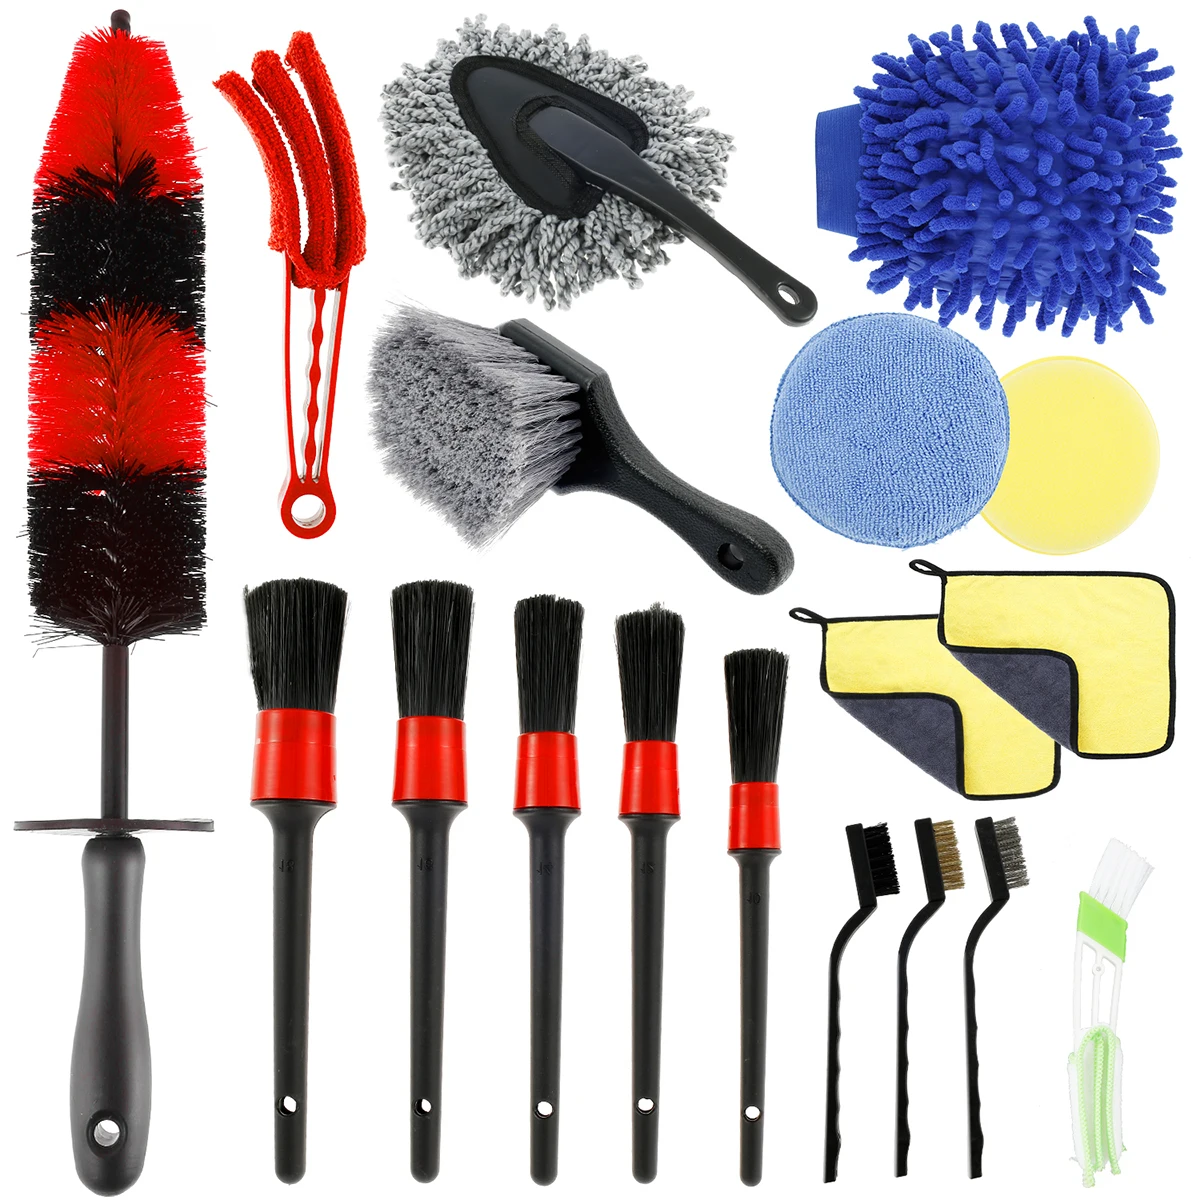 New18Pcs Car Cleaning Brush Deep Clean Rim Detailing Brush with Long Handle Non Scratch Car Duster Gentle Effective Cleaner